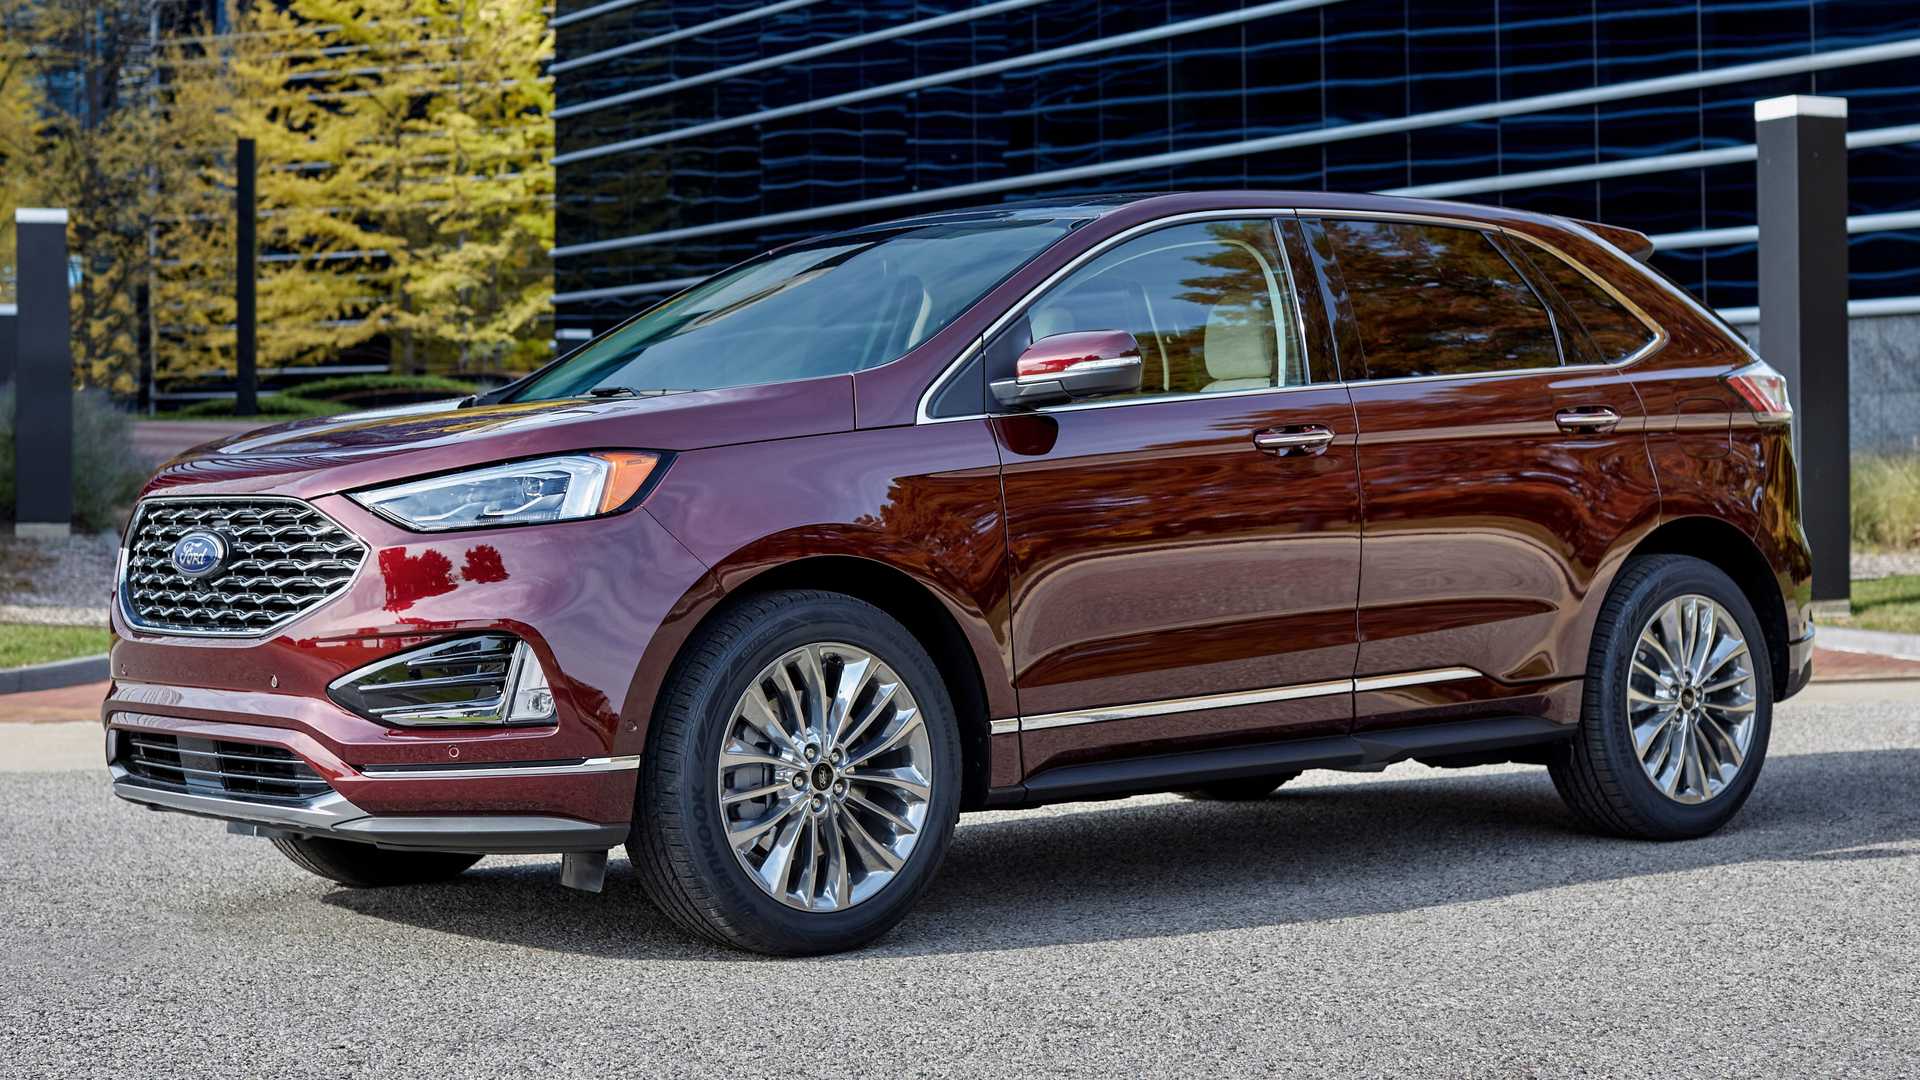 Ford’s Edge 2021 Model is here with few updates